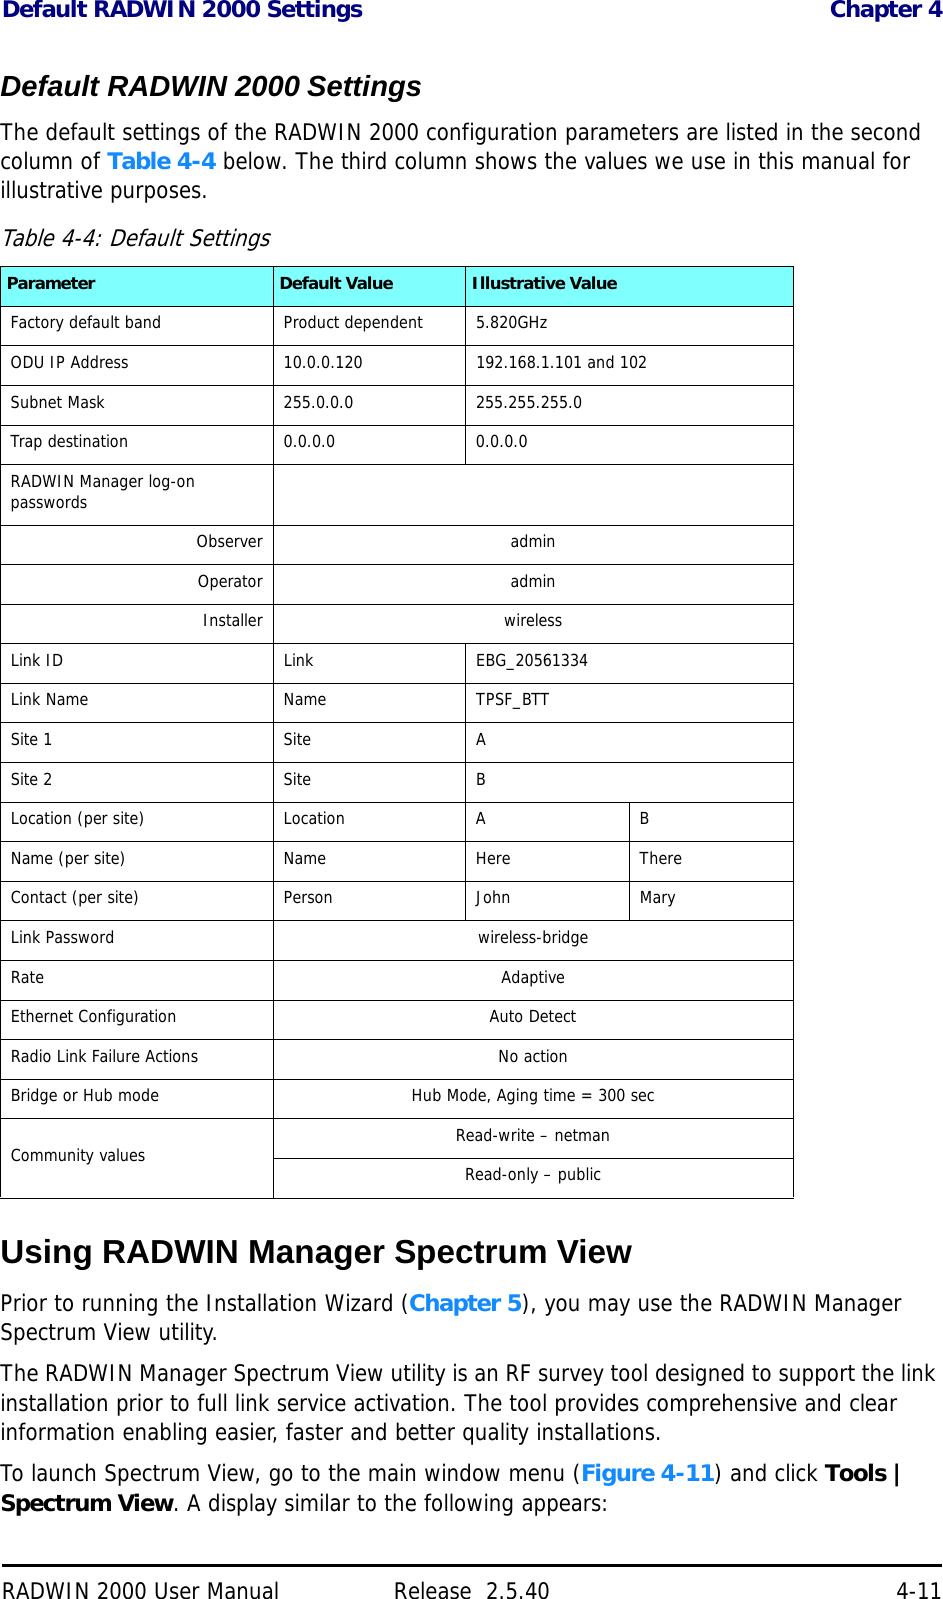 Default RADWIN 2000 Settings Chapter 4RADWIN 2000 User Manual Release  2.5.40 4-11Default RADWIN 2000 SettingsThe default settings of the RADWIN 2000 configuration parameters are listed in the second column of Table 4-4 below. The third column shows the values we use in this manual for illustrative purposes.Using RADWIN Manager Spectrum ViewPrior to running the Installation Wizard (Chapter 5), you may use the RADWIN Manager Spectrum View utility. The RADWIN Manager Spectrum View utility is an RF survey tool designed to support the link installation prior to full link service activation. The tool provides comprehensive and clear information enabling easier, faster and better quality installations.To launch Spectrum View, go to the main window menu (Figure 4-11) and click Tools | Spectrum View. A display similar to the following appears:Table 4-4: Default SettingsParameter Default Value Illustrative ValueFactory default band Product dependent 5.820GHzODU IP Address 10.0.0.120 192.168.1.101 and 102Subnet Mask 255.0.0.0 255.255.255.0Trap destination 0.0.0.0 0.0.0.0RADWIN Manager log-on passwordsObserver adminOperator adminInstaller wirelessLink ID Link EBG_20561334Link Name Name TPSF_BTTSite 1 Site ASite 2 Site BLocation (per site) Location A BName (per site) Name Here ThereContact (per site) Person John MaryLink Password wireless-bridgeRate AdaptiveEthernet Configuration Auto DetectRadio Link Failure Actions No actionBridge or Hub mode Hub Mode, Aging time = 300 secCommunity values Read-write – netmanRead-only – public